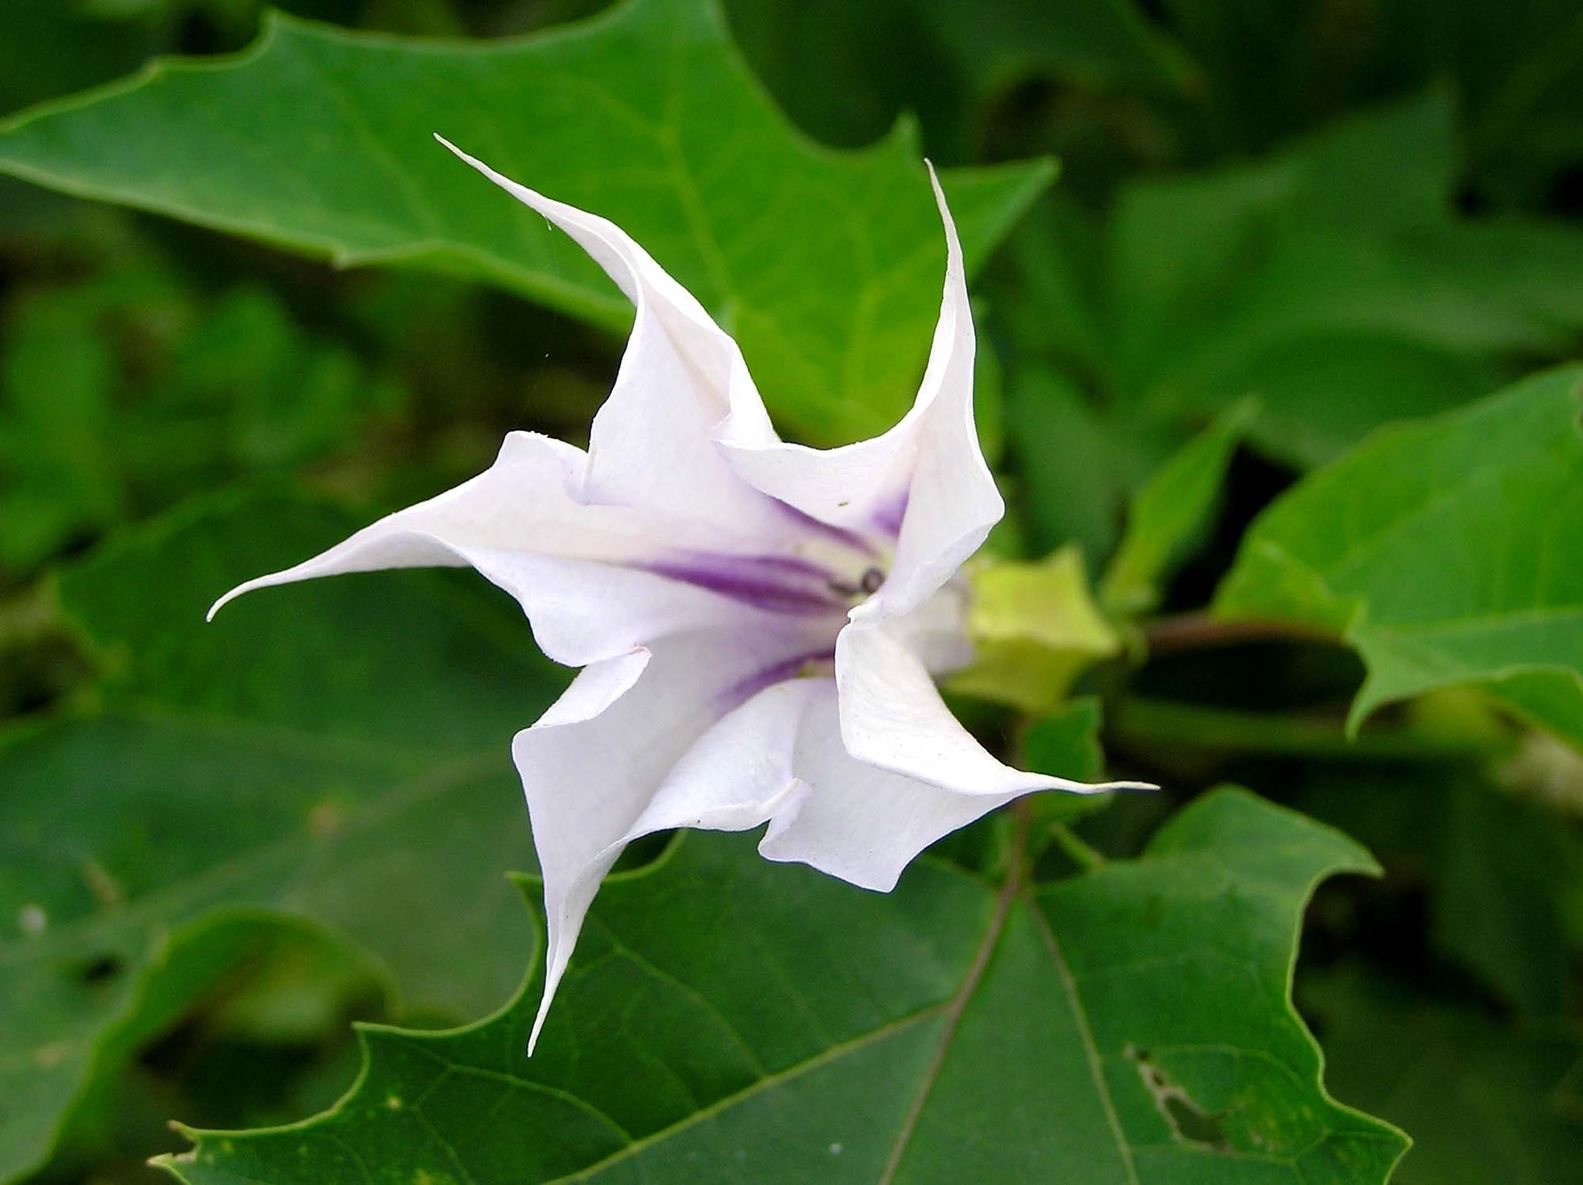 Atropa belladonna: A Useful Medicinal Plant – Naturopathic Doctor and Review